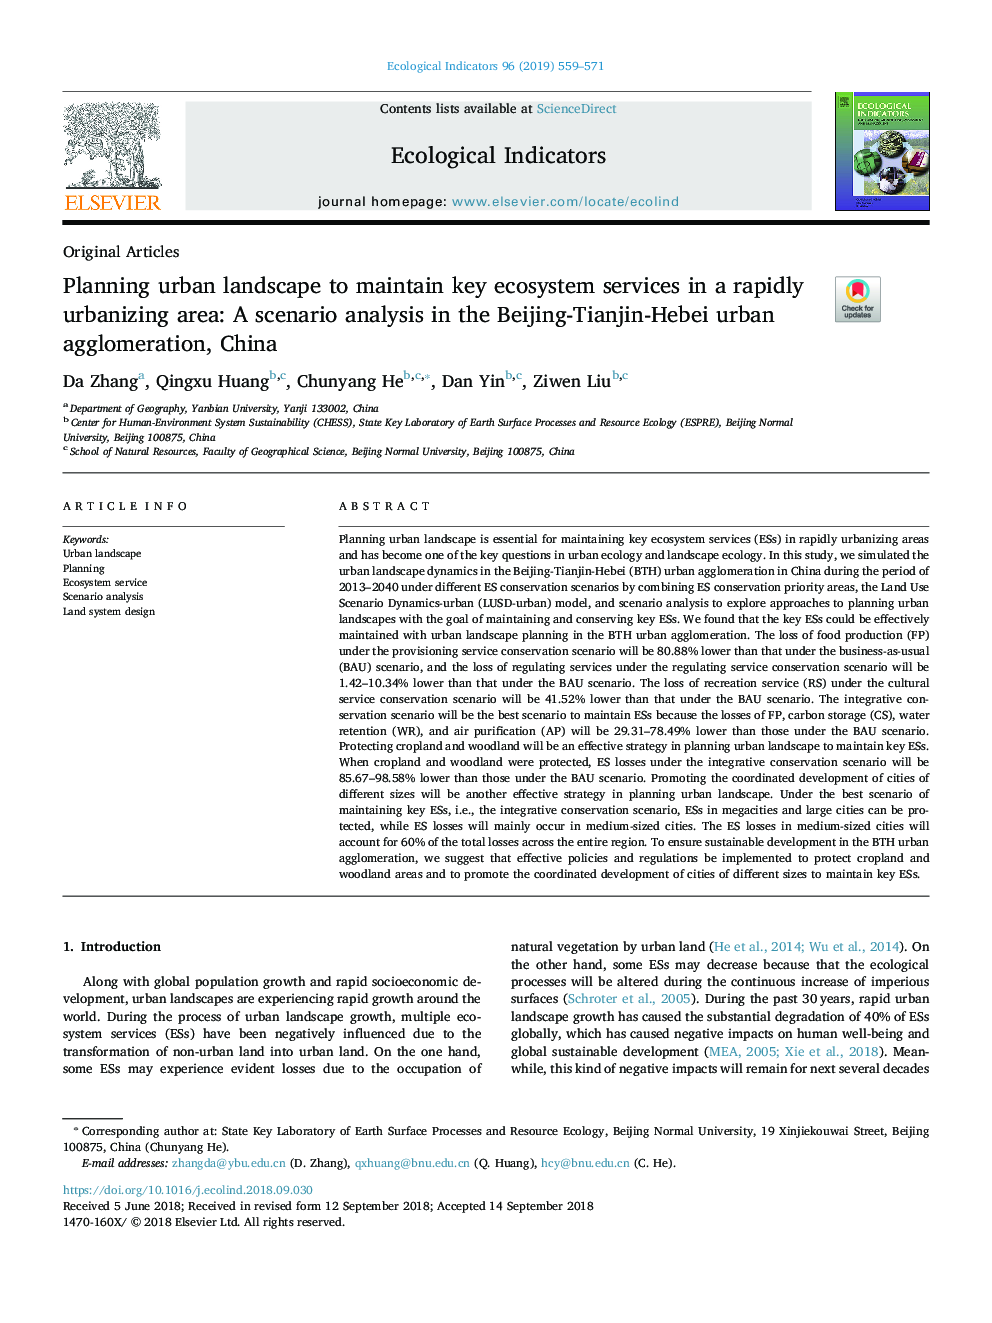 Planning urban landscape to maintain key ecosystem services in a rapidly urbanizing area: A scenario analysis in the Beijing-Tianjin-Hebei urban agglomeration, China